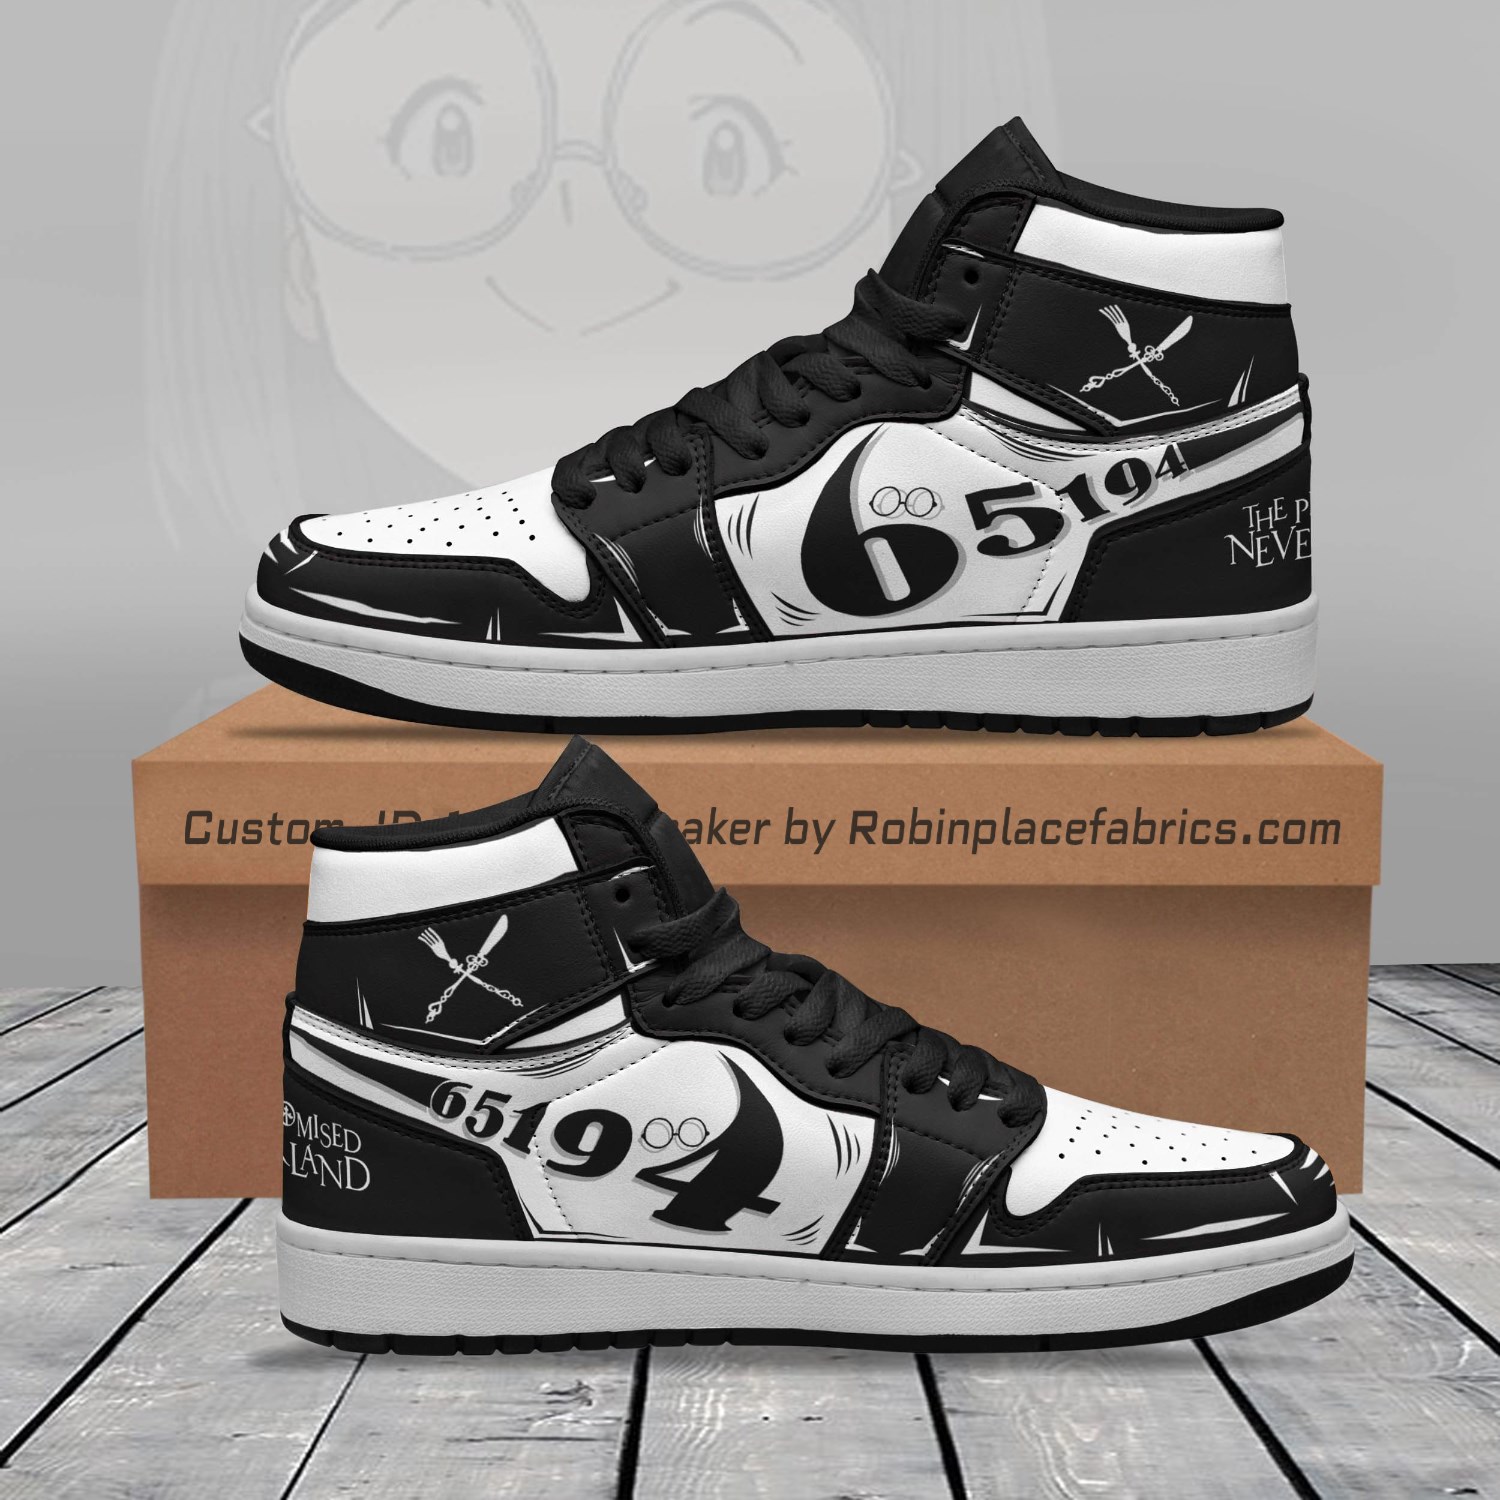 Gilda JD Sneakers Custom The Promised Neverland Anime Shoes ...